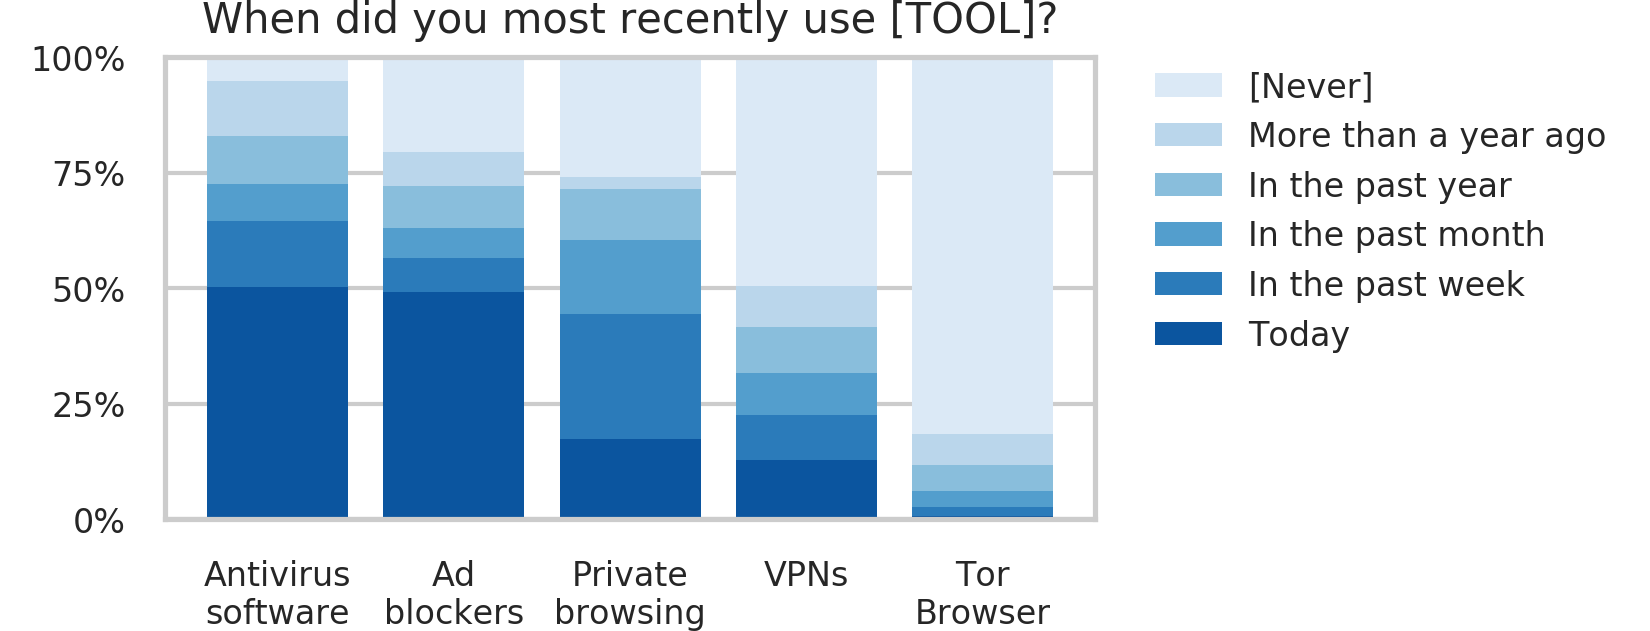 'When did you most recently using [TOOL]?' Tool usage in descending order: antivirus software, ad blockers, private browsing, VPNs, and Tor Browser